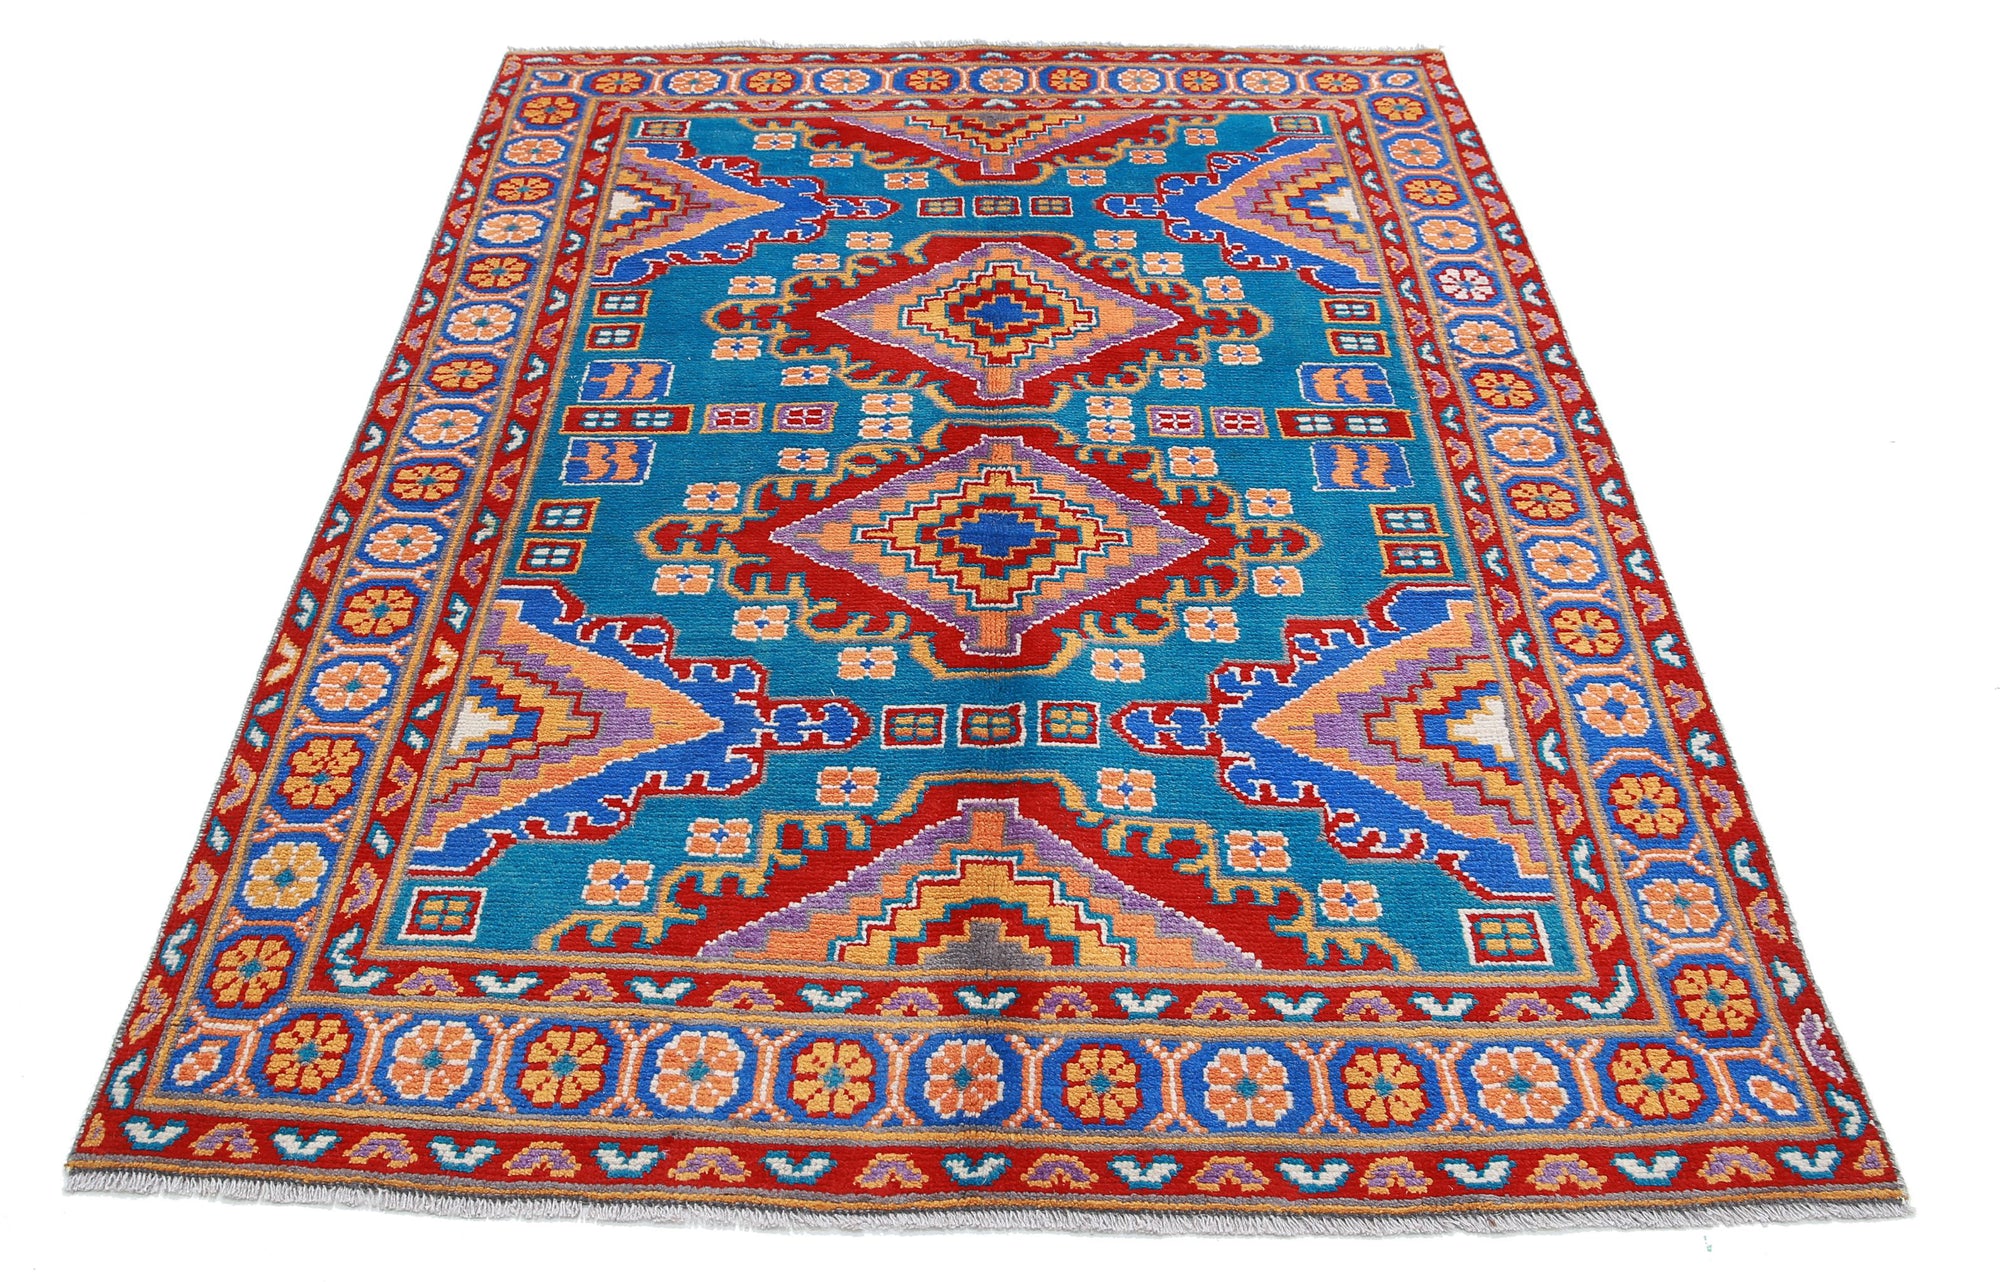 Revival-hand-knotted-qarghani-wool-rug-5014093-3.jpg